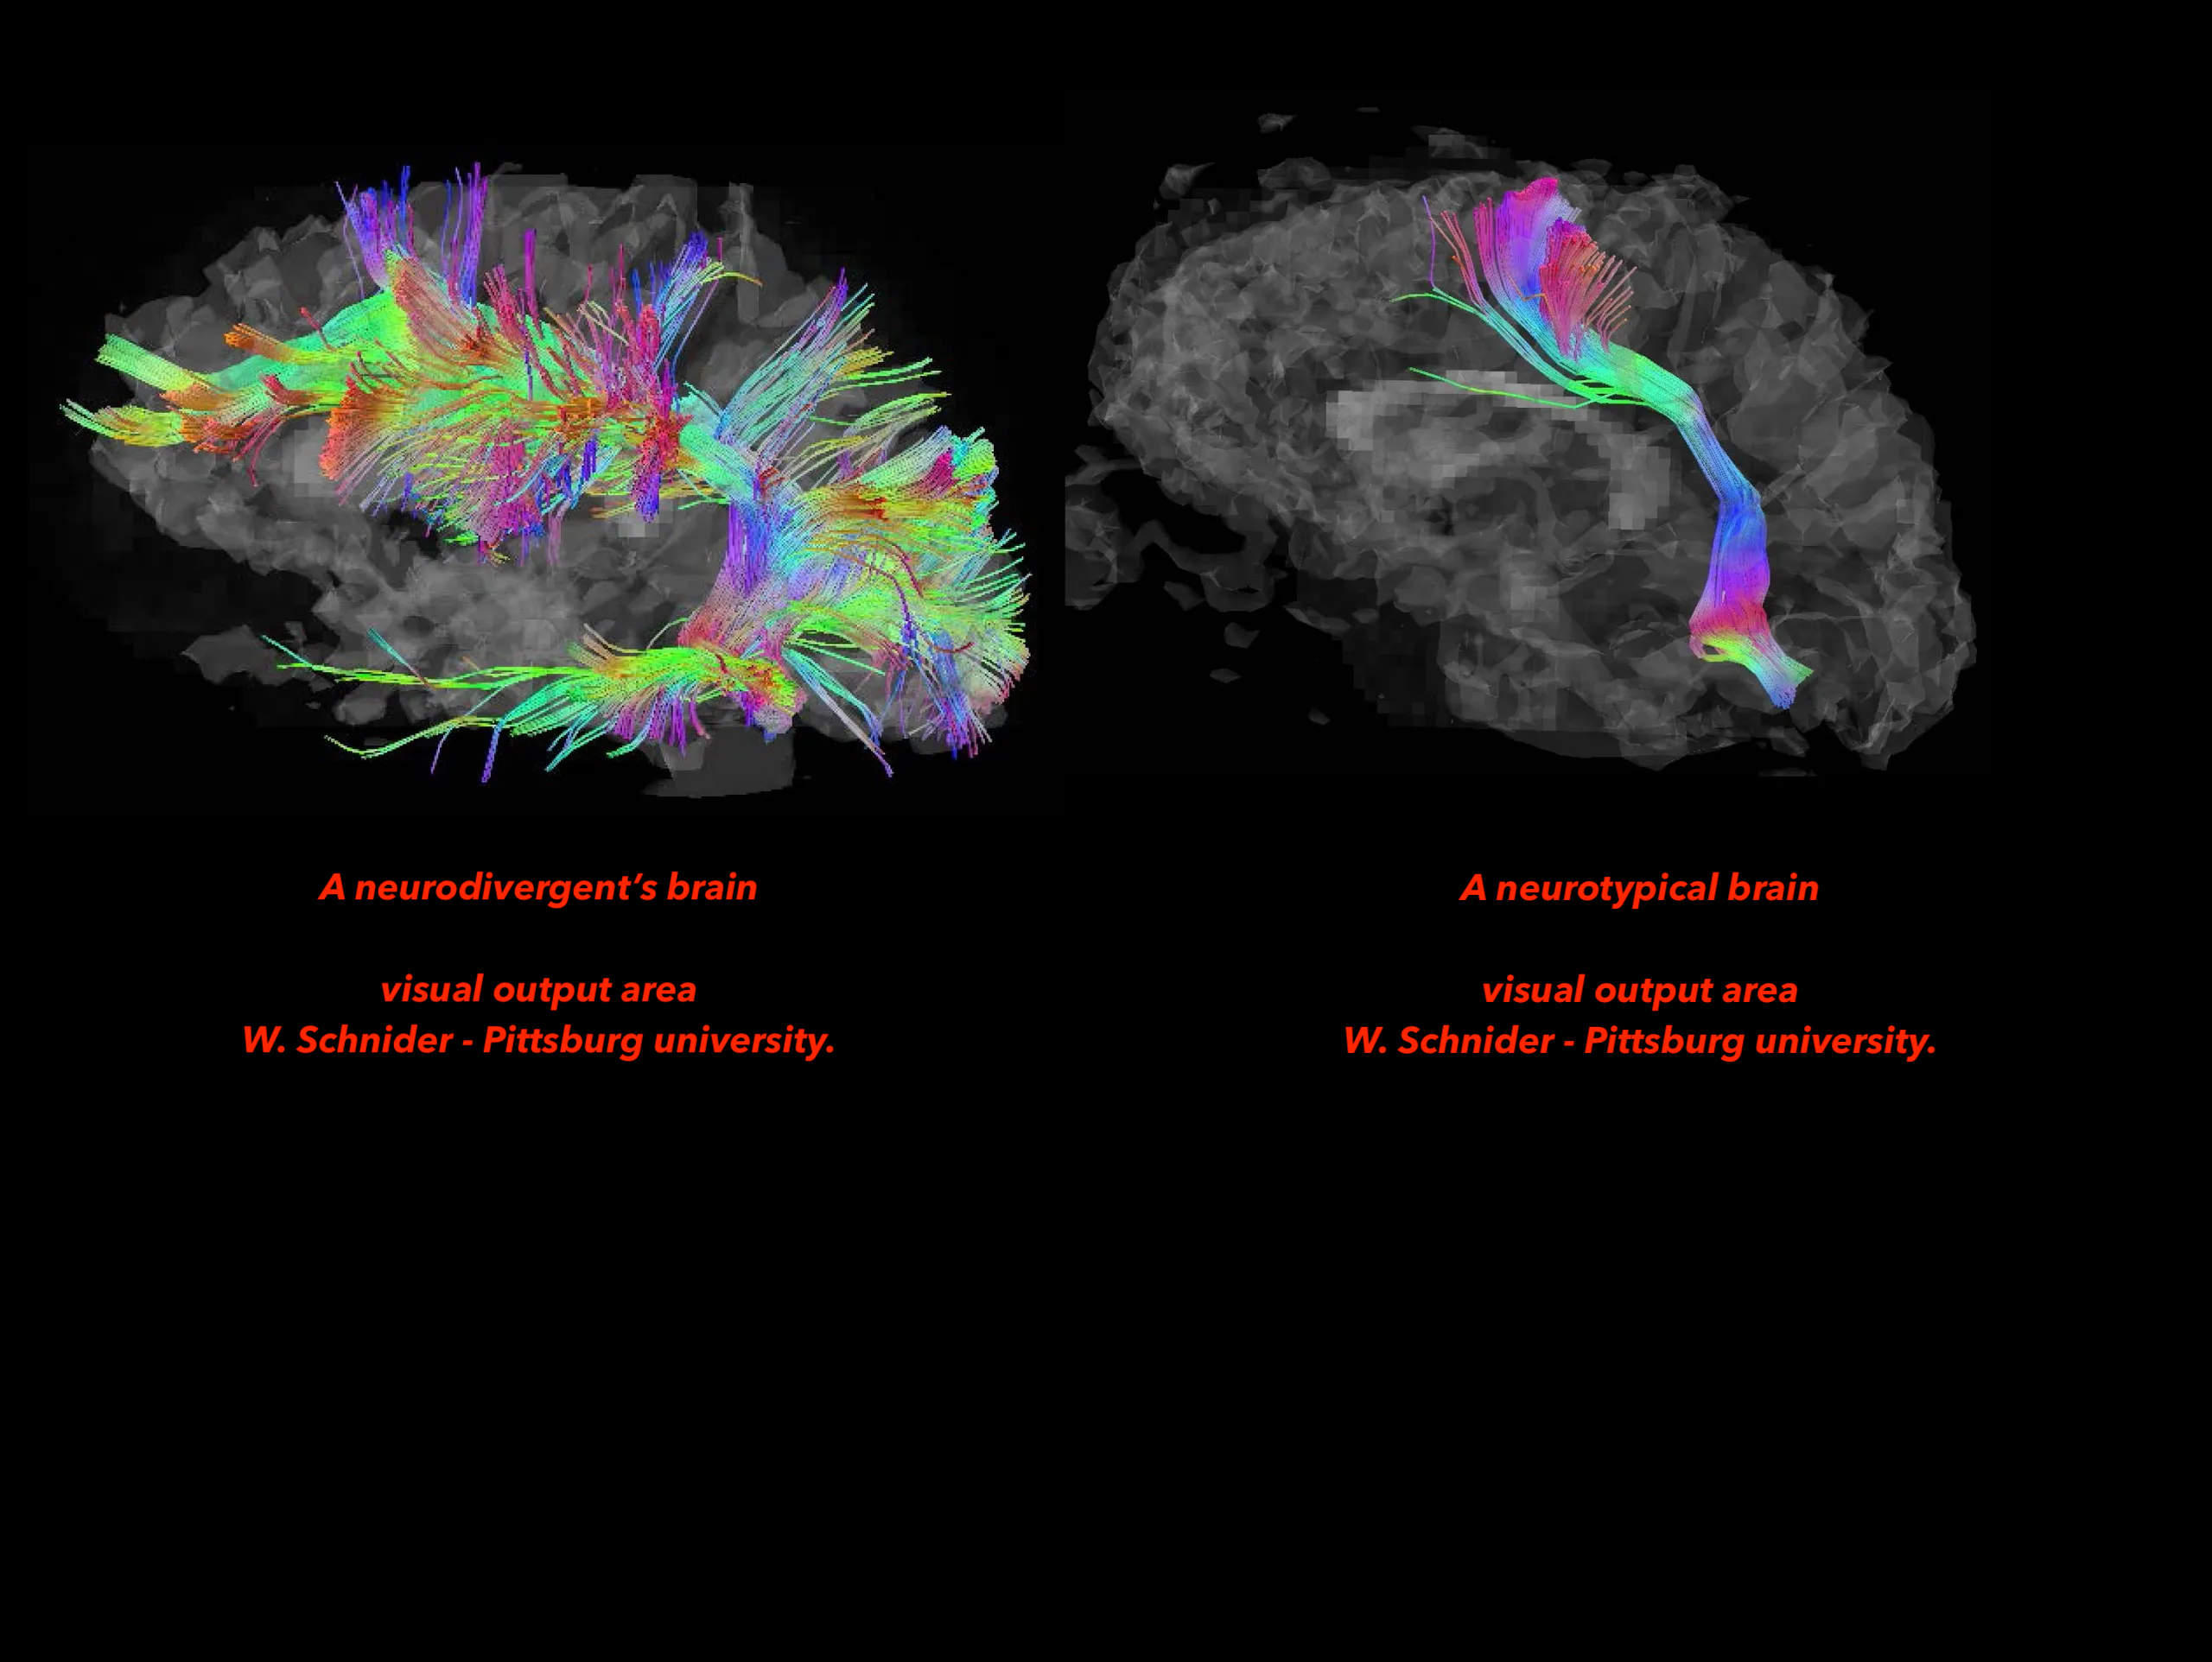 brain scan of ND & NT brians - the neurodivergent brain to the left shows more neurones in the visual output. To the right hand side is a neurotypical brain's visual output - much smaller.